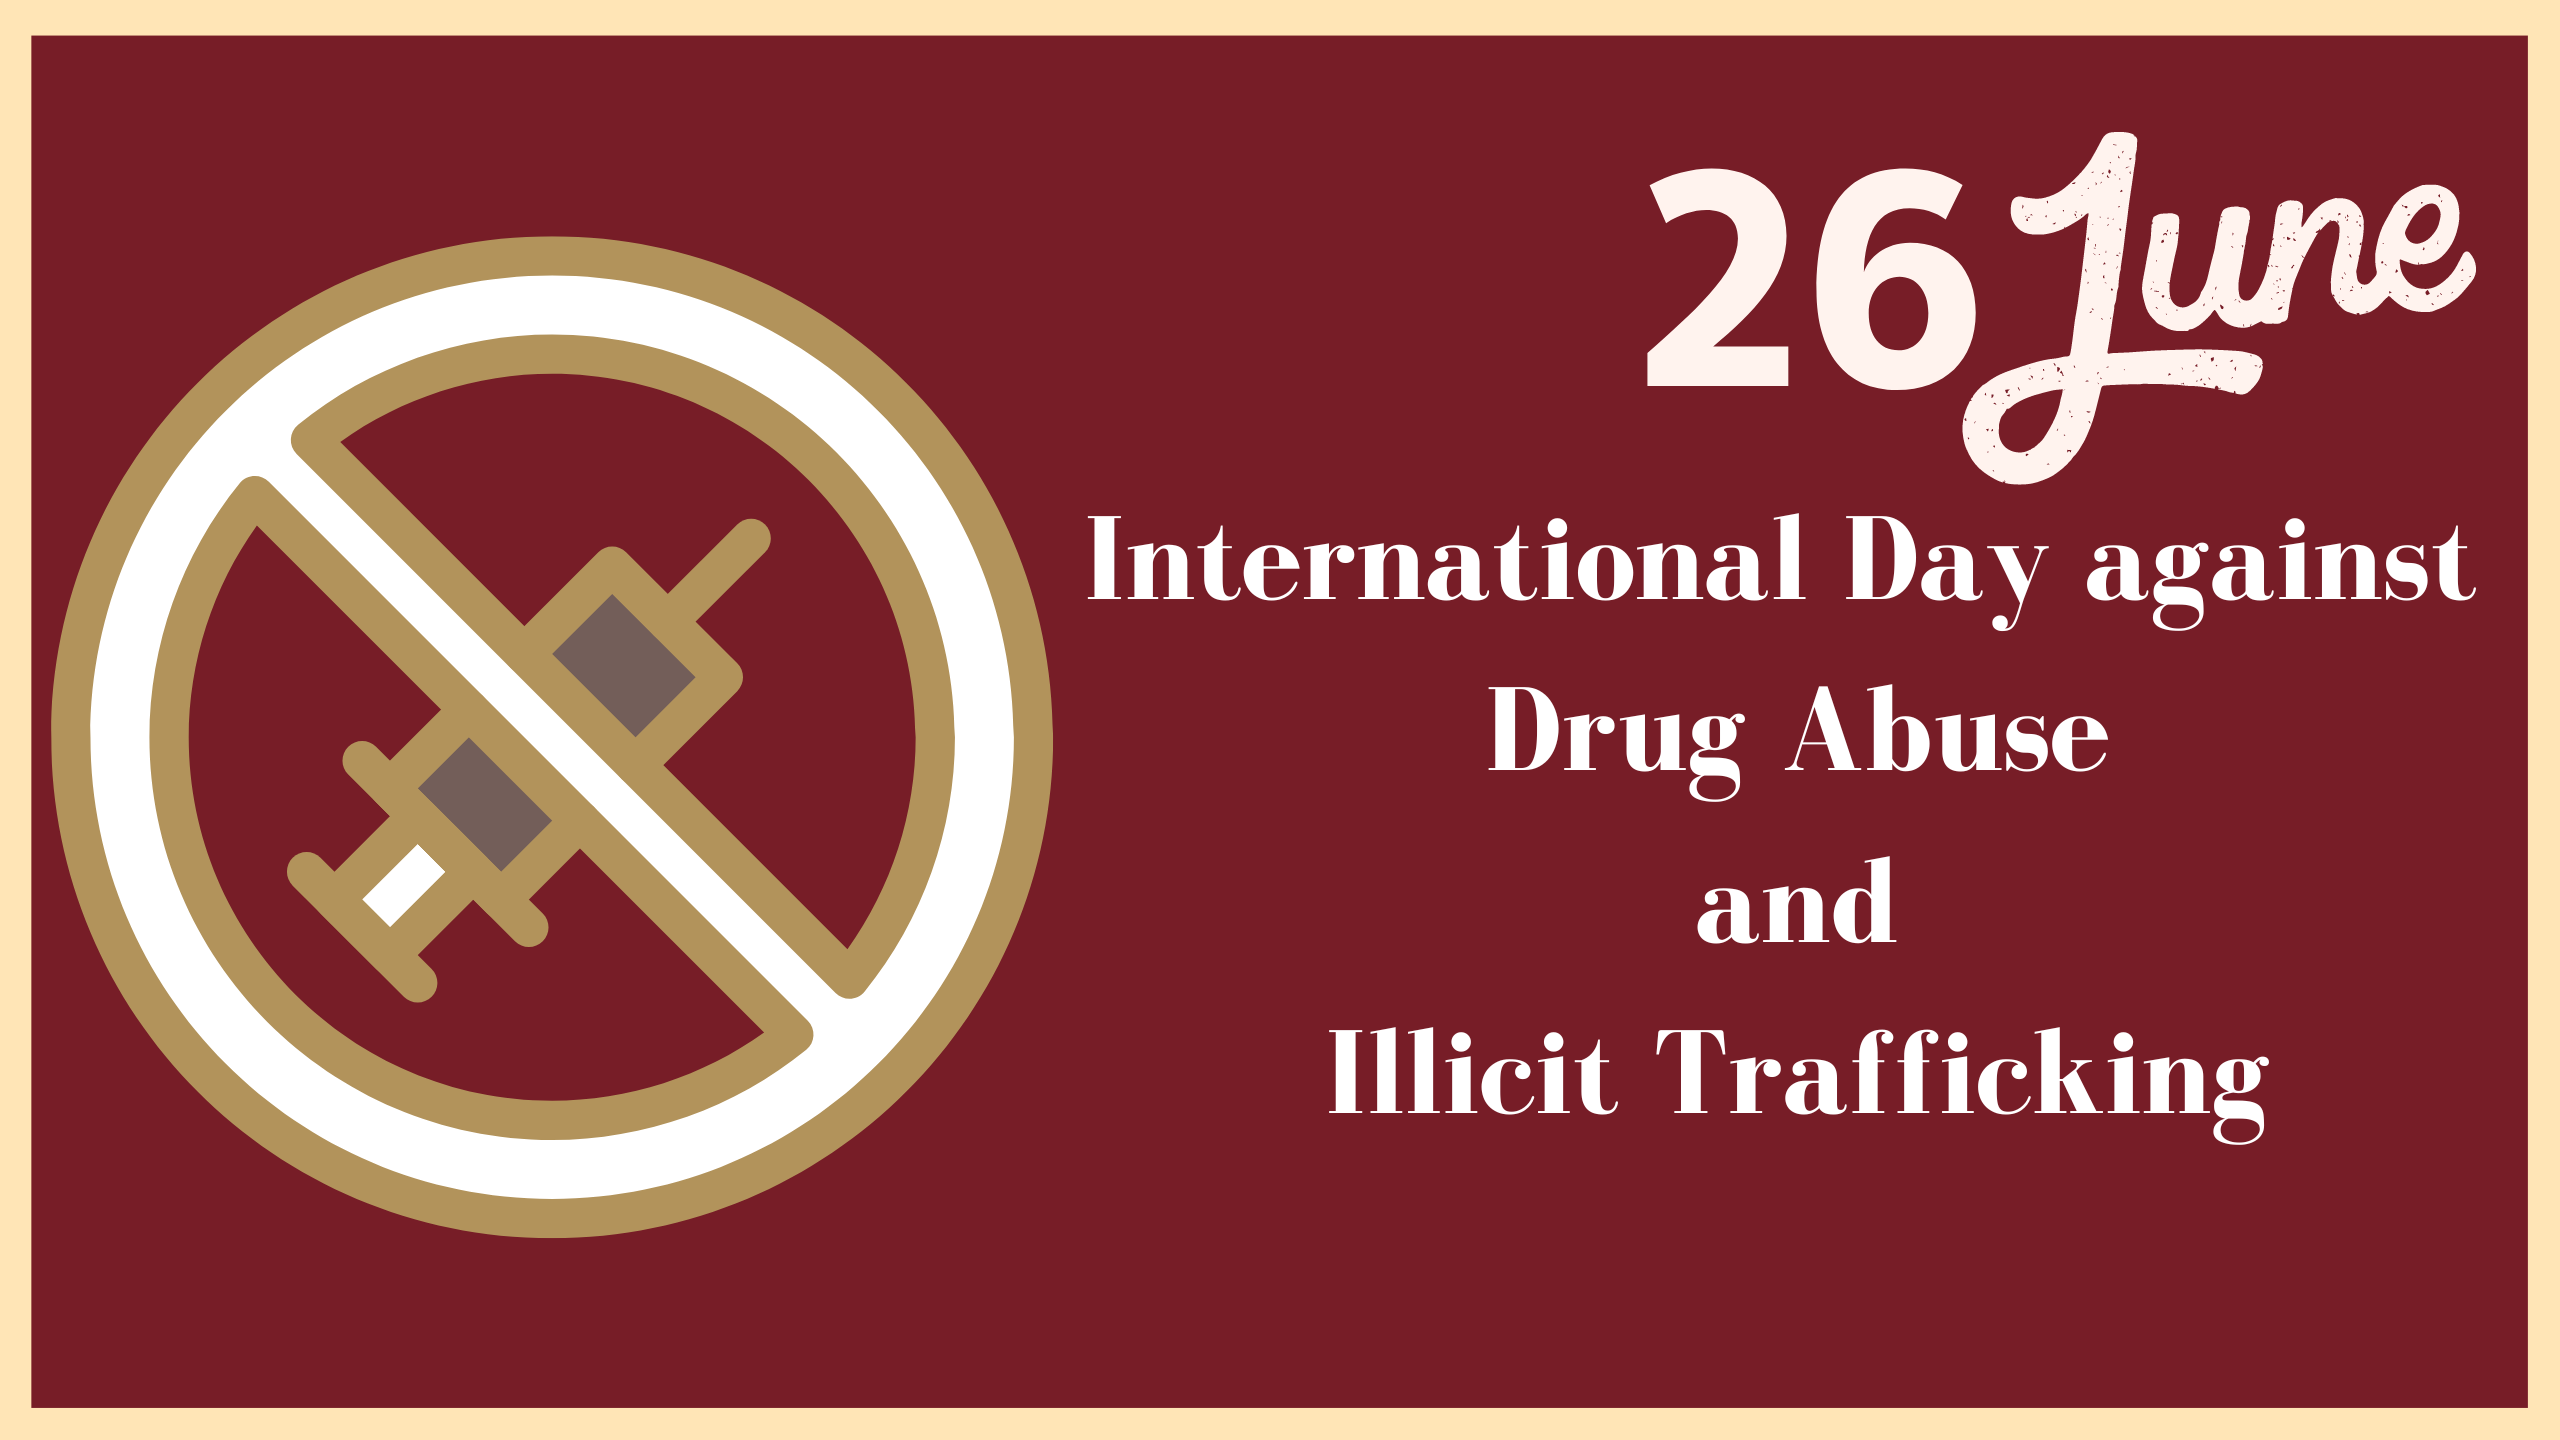 Why drug abuse and illicit trafficking poses a significant global challenge